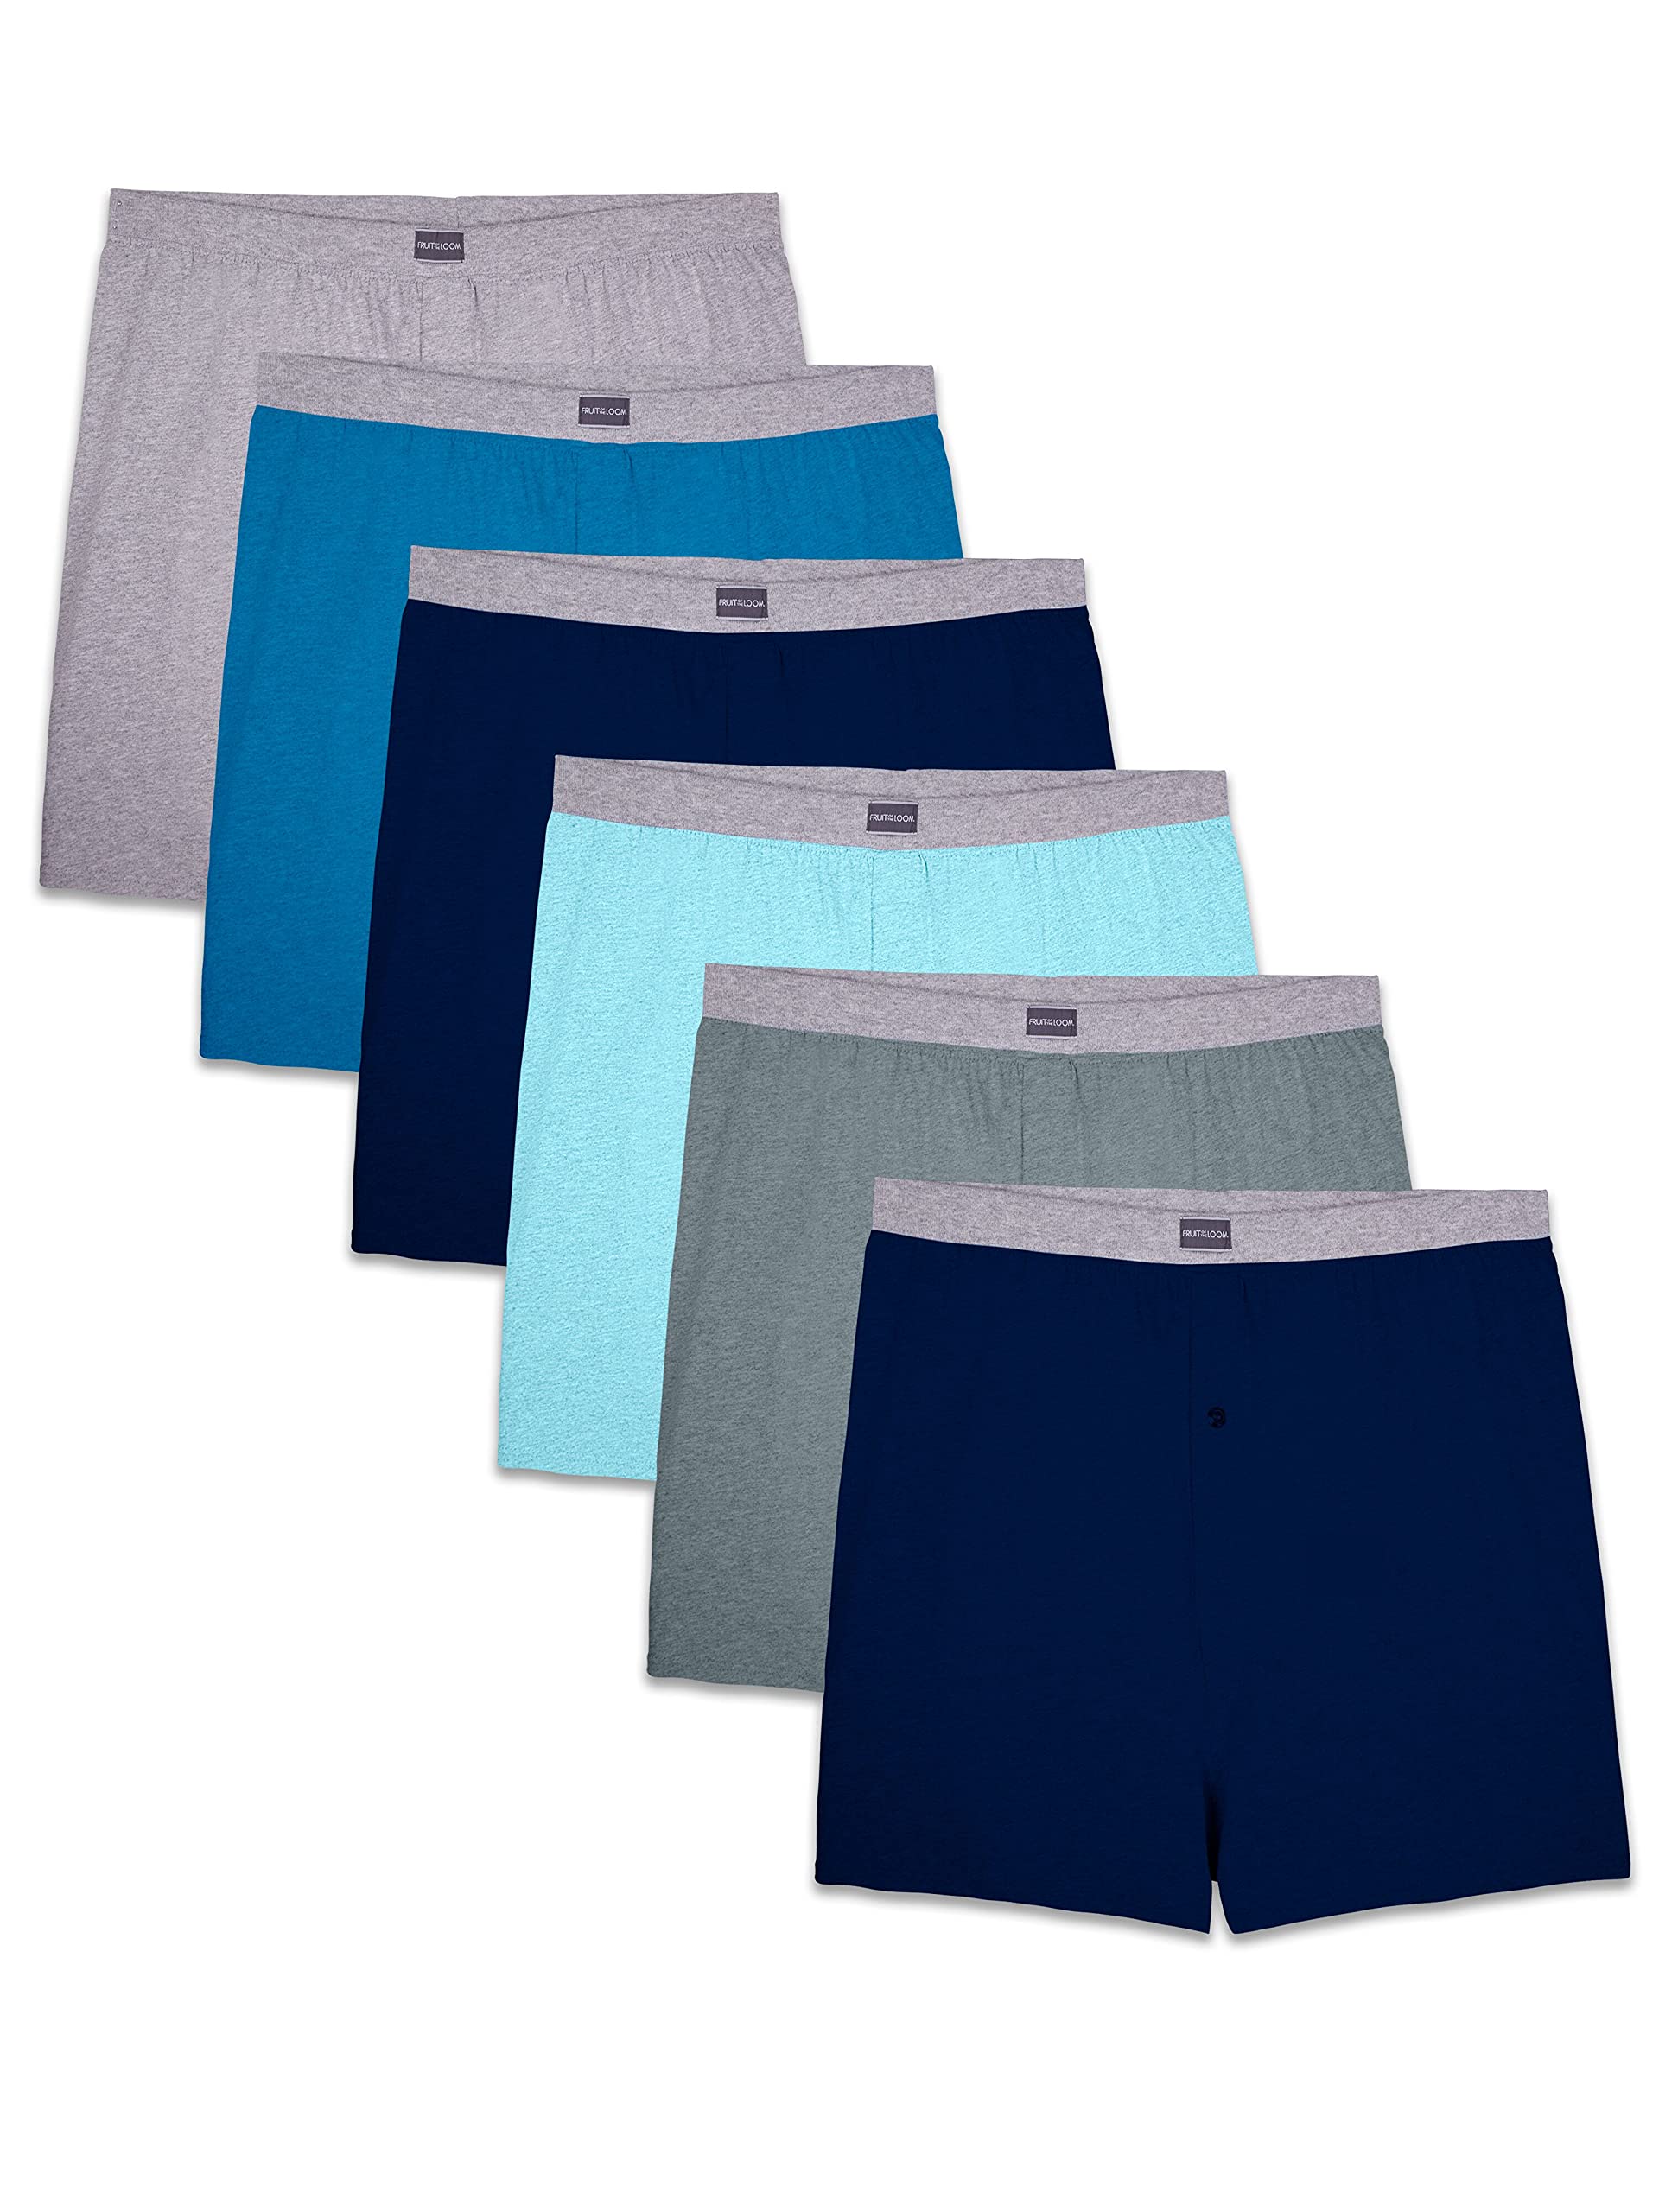 Fruit of the Loom Men's Tag-Free Boxer Shorts (Knit & Woven)